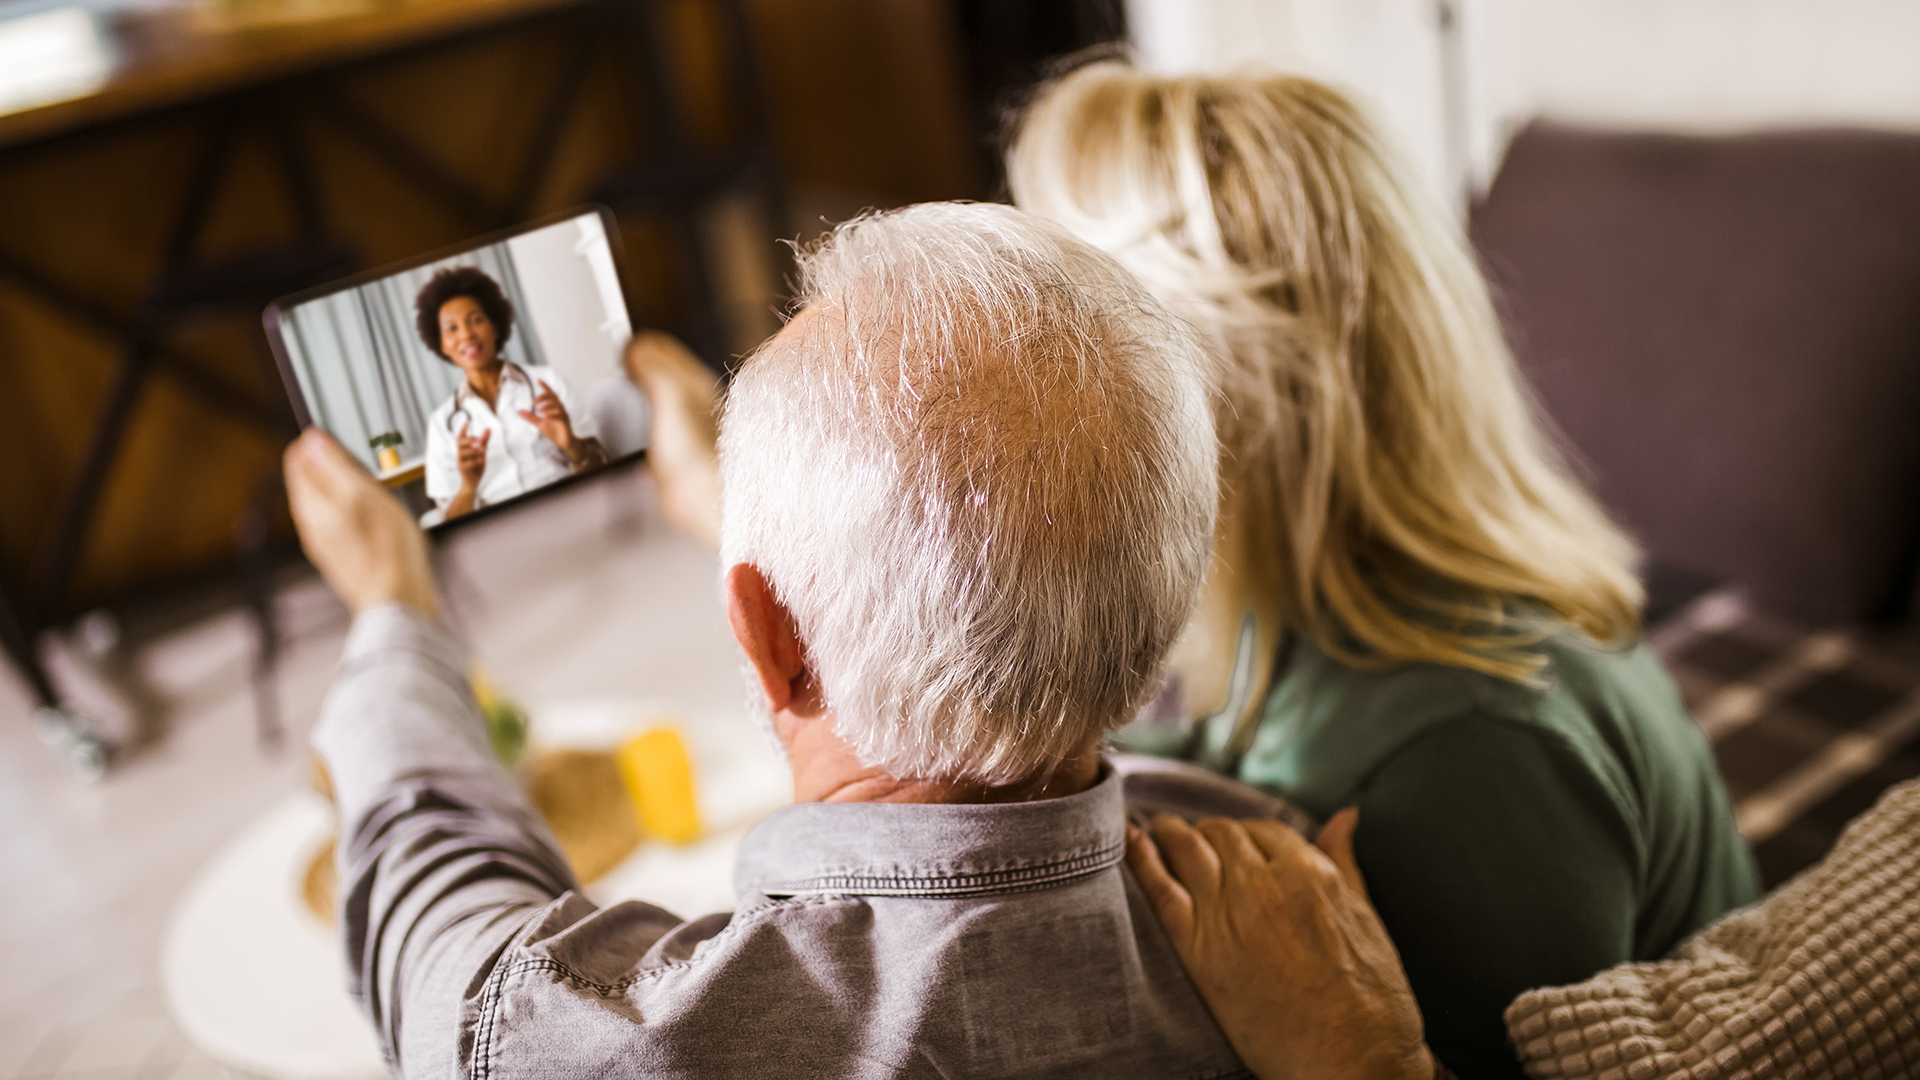 Senior couple at home holding digital tablet during video call with family doctor